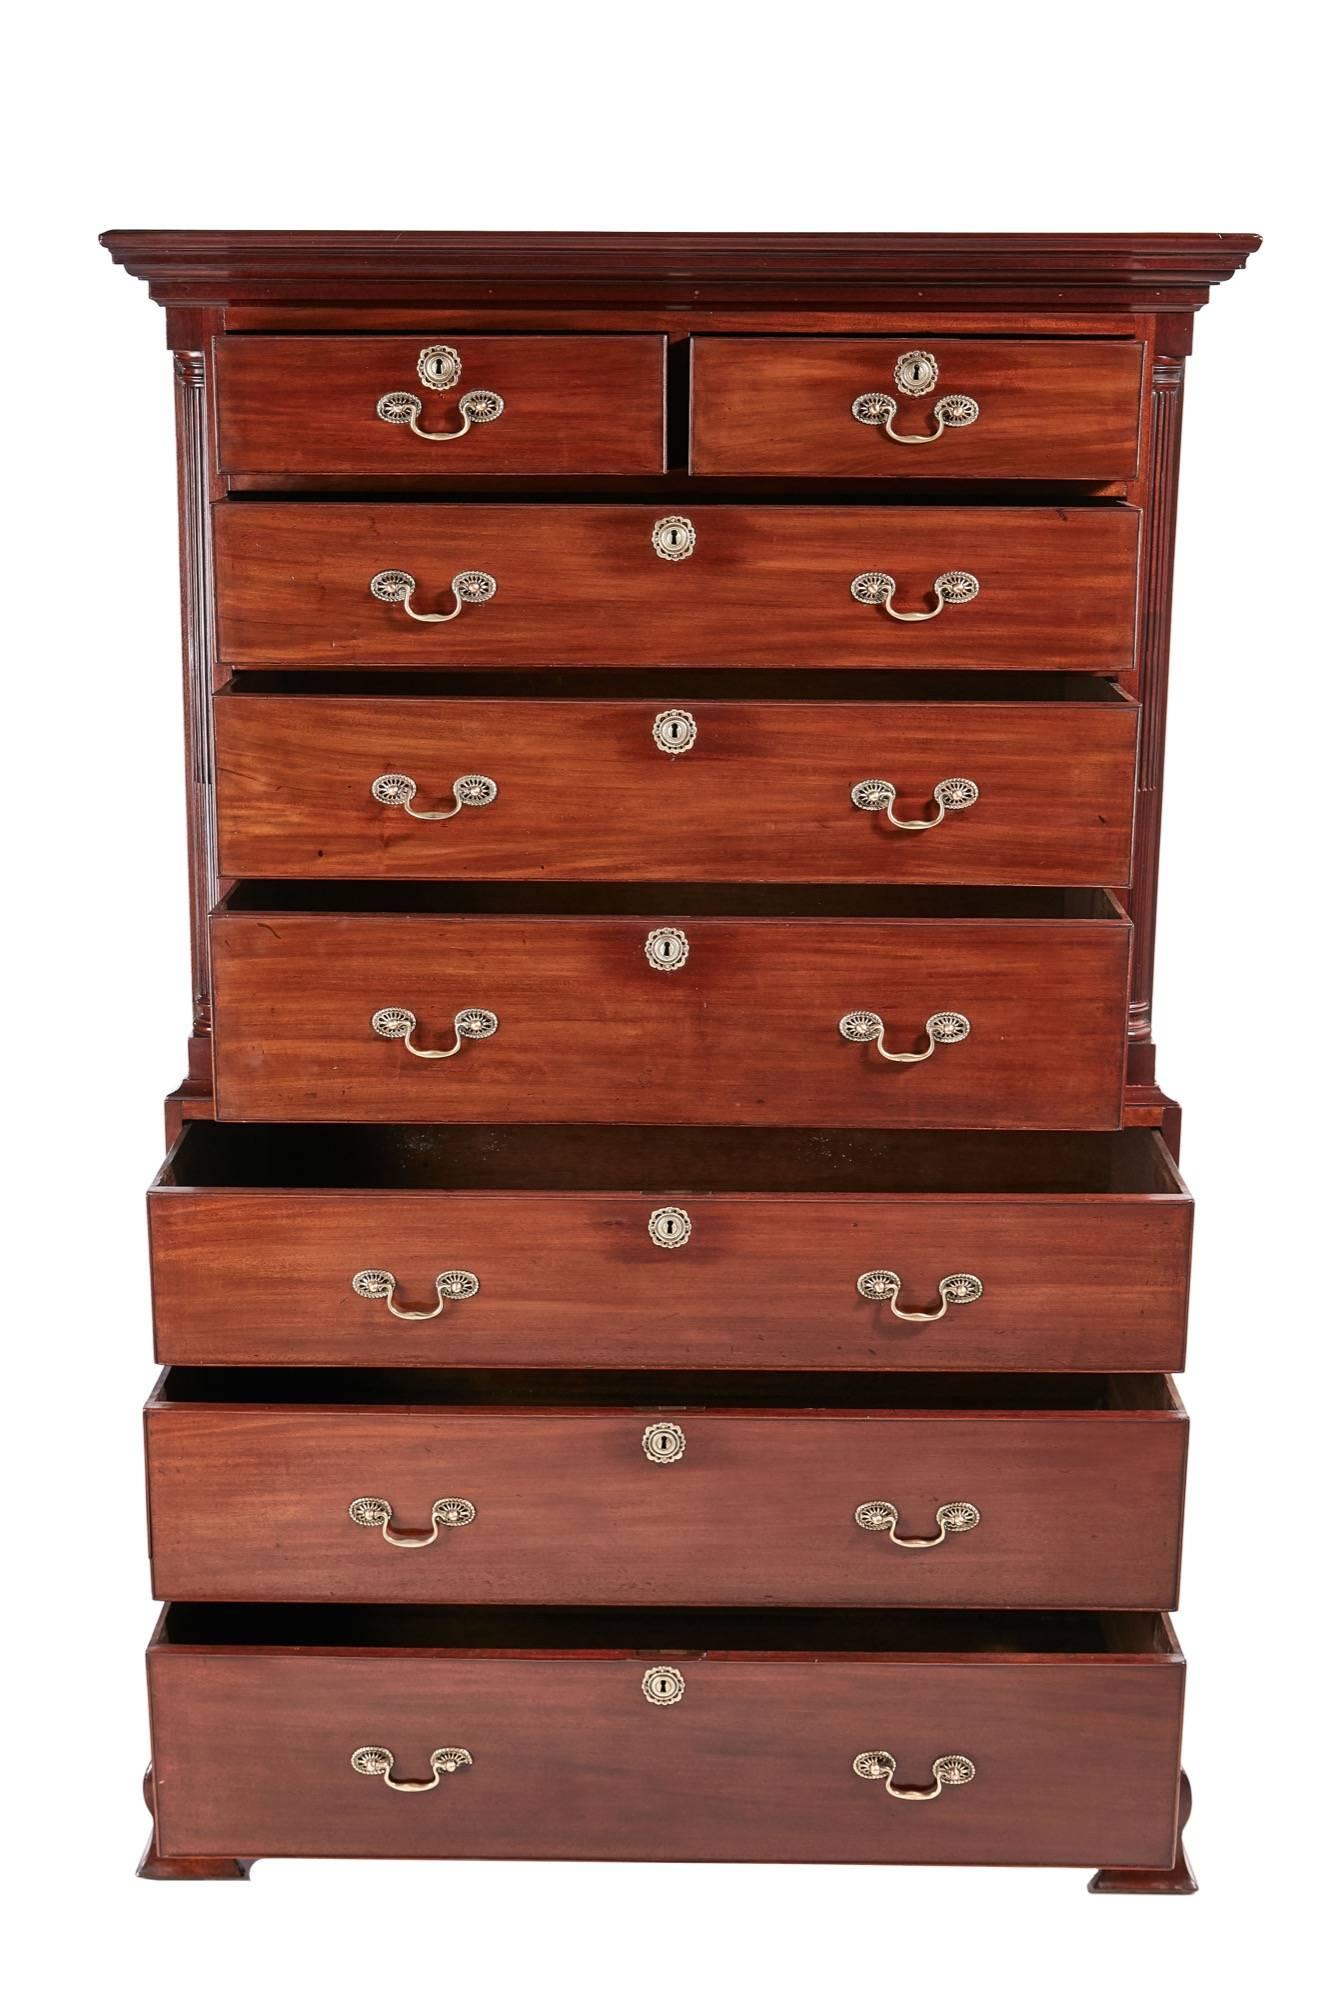 18th century mahogany chest on chest or tallboy, the moulded edge top above two short drawers and six long drawers all oak lined with original brass handles, reeded fluted columns, standing on original ogee bracket feet
Fantastic color and